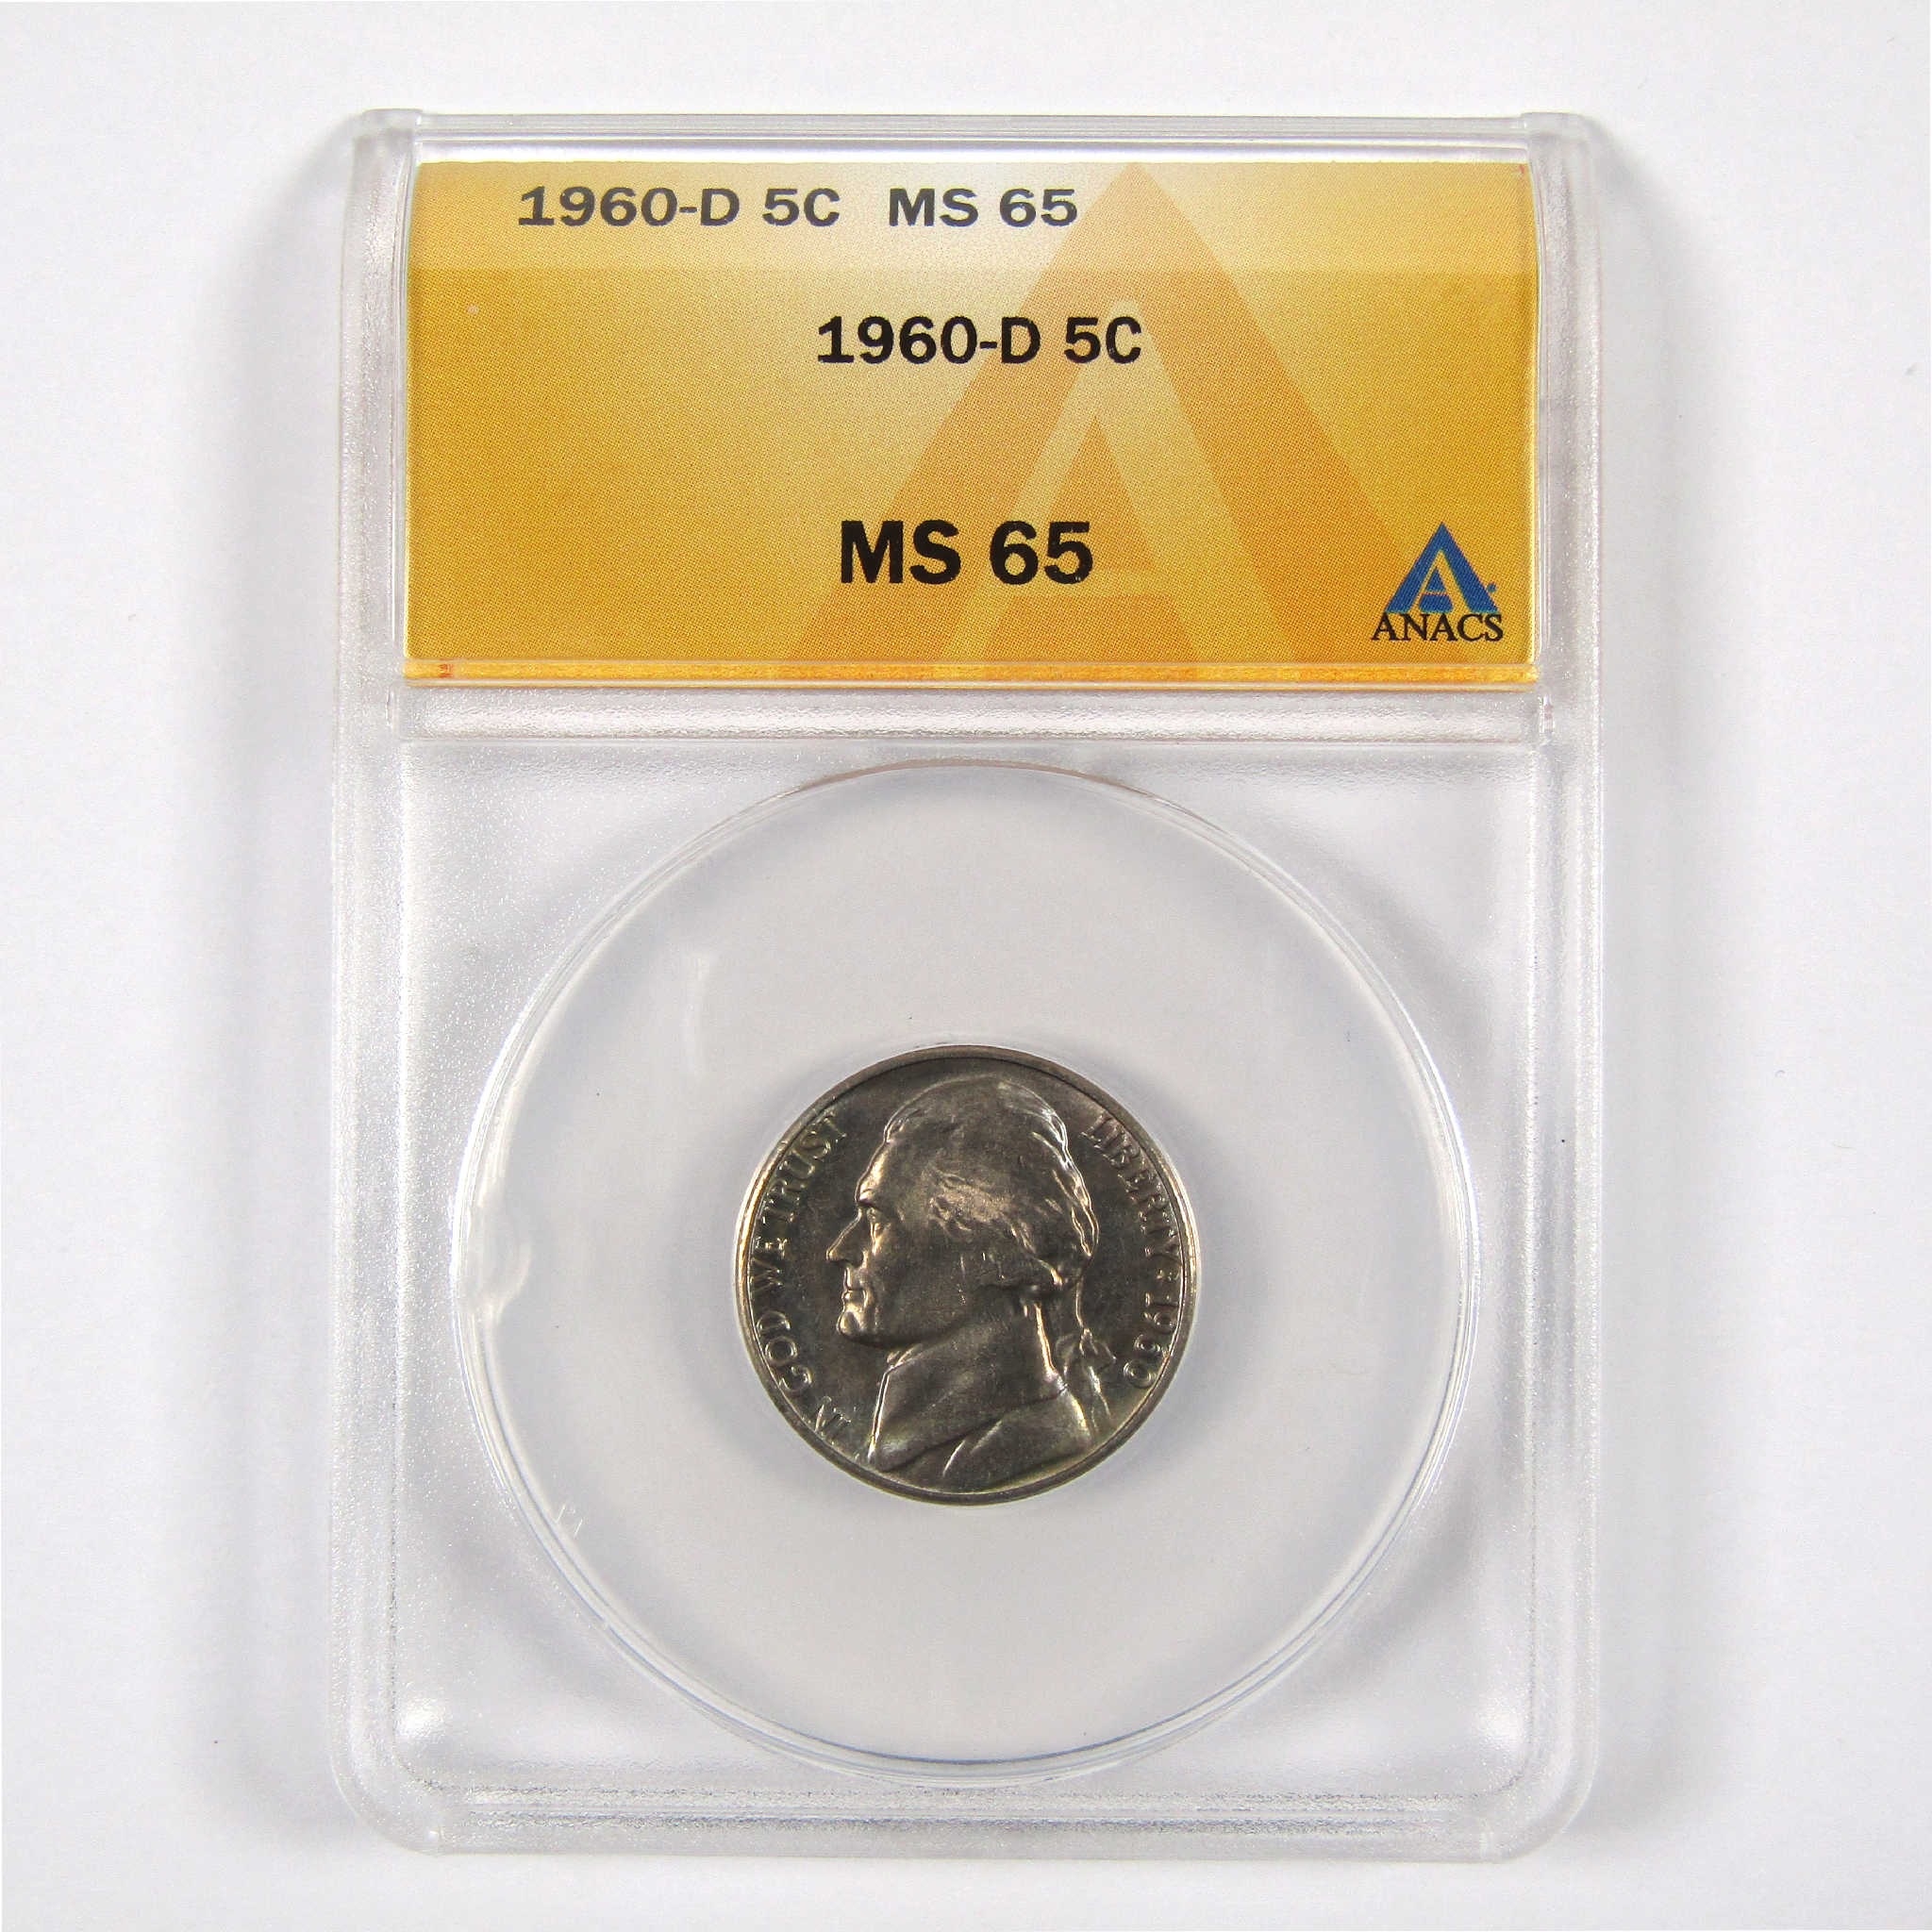 1960 D Jefferson Nickel MS 65 ANACS 5c Uncirculated Coin SKU:CPC4056